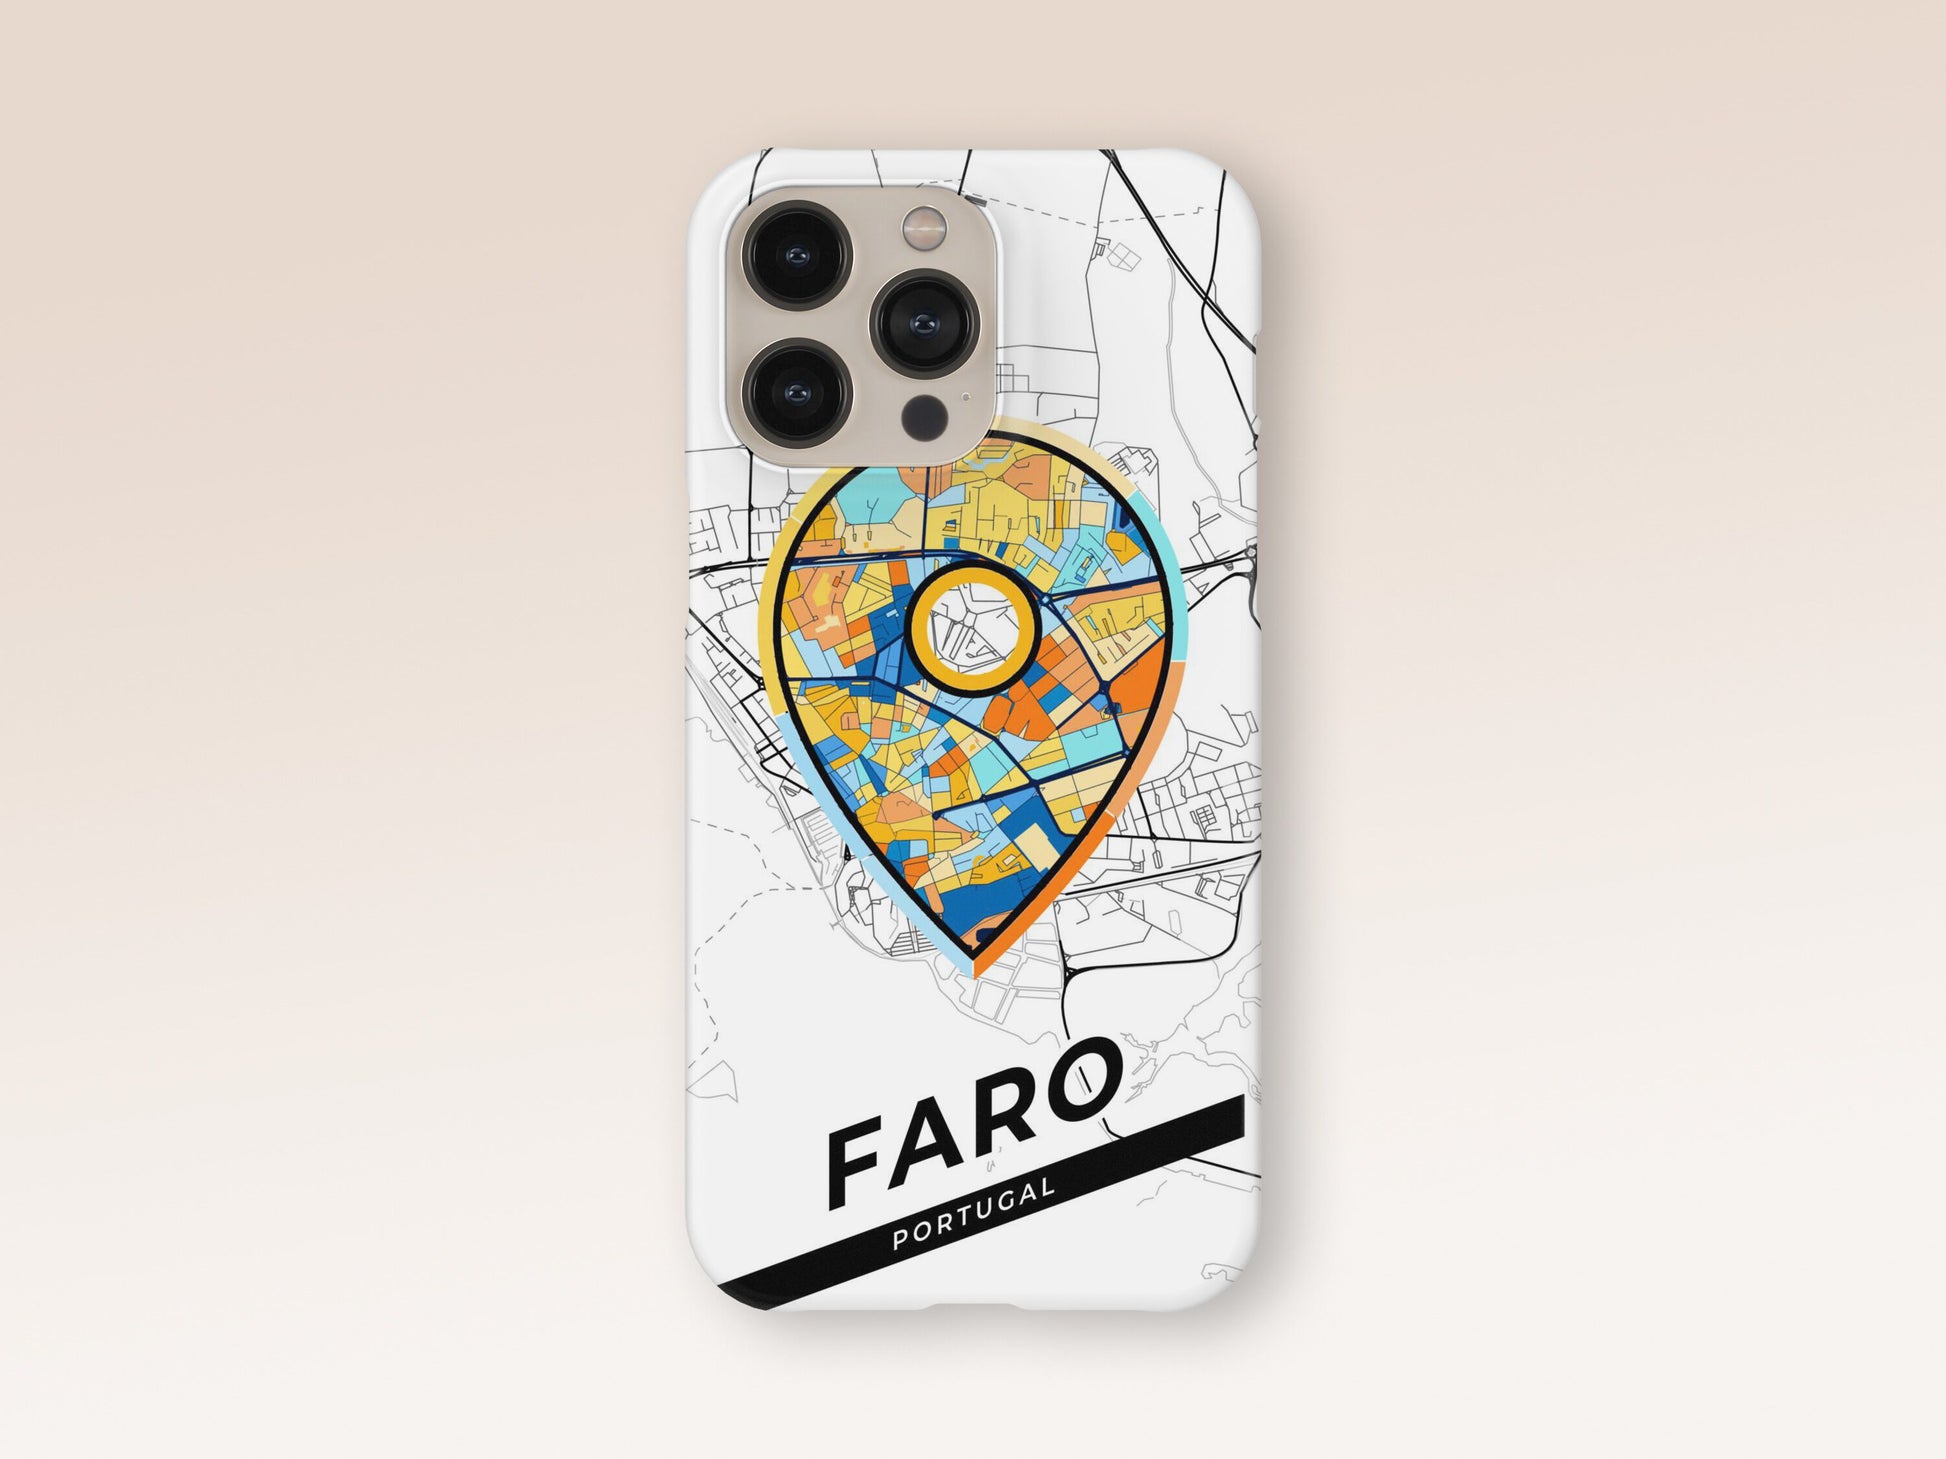 Faro Portugal slim phone case with colorful icon. Birthday, wedding or housewarming gift. Couple match cases. 1